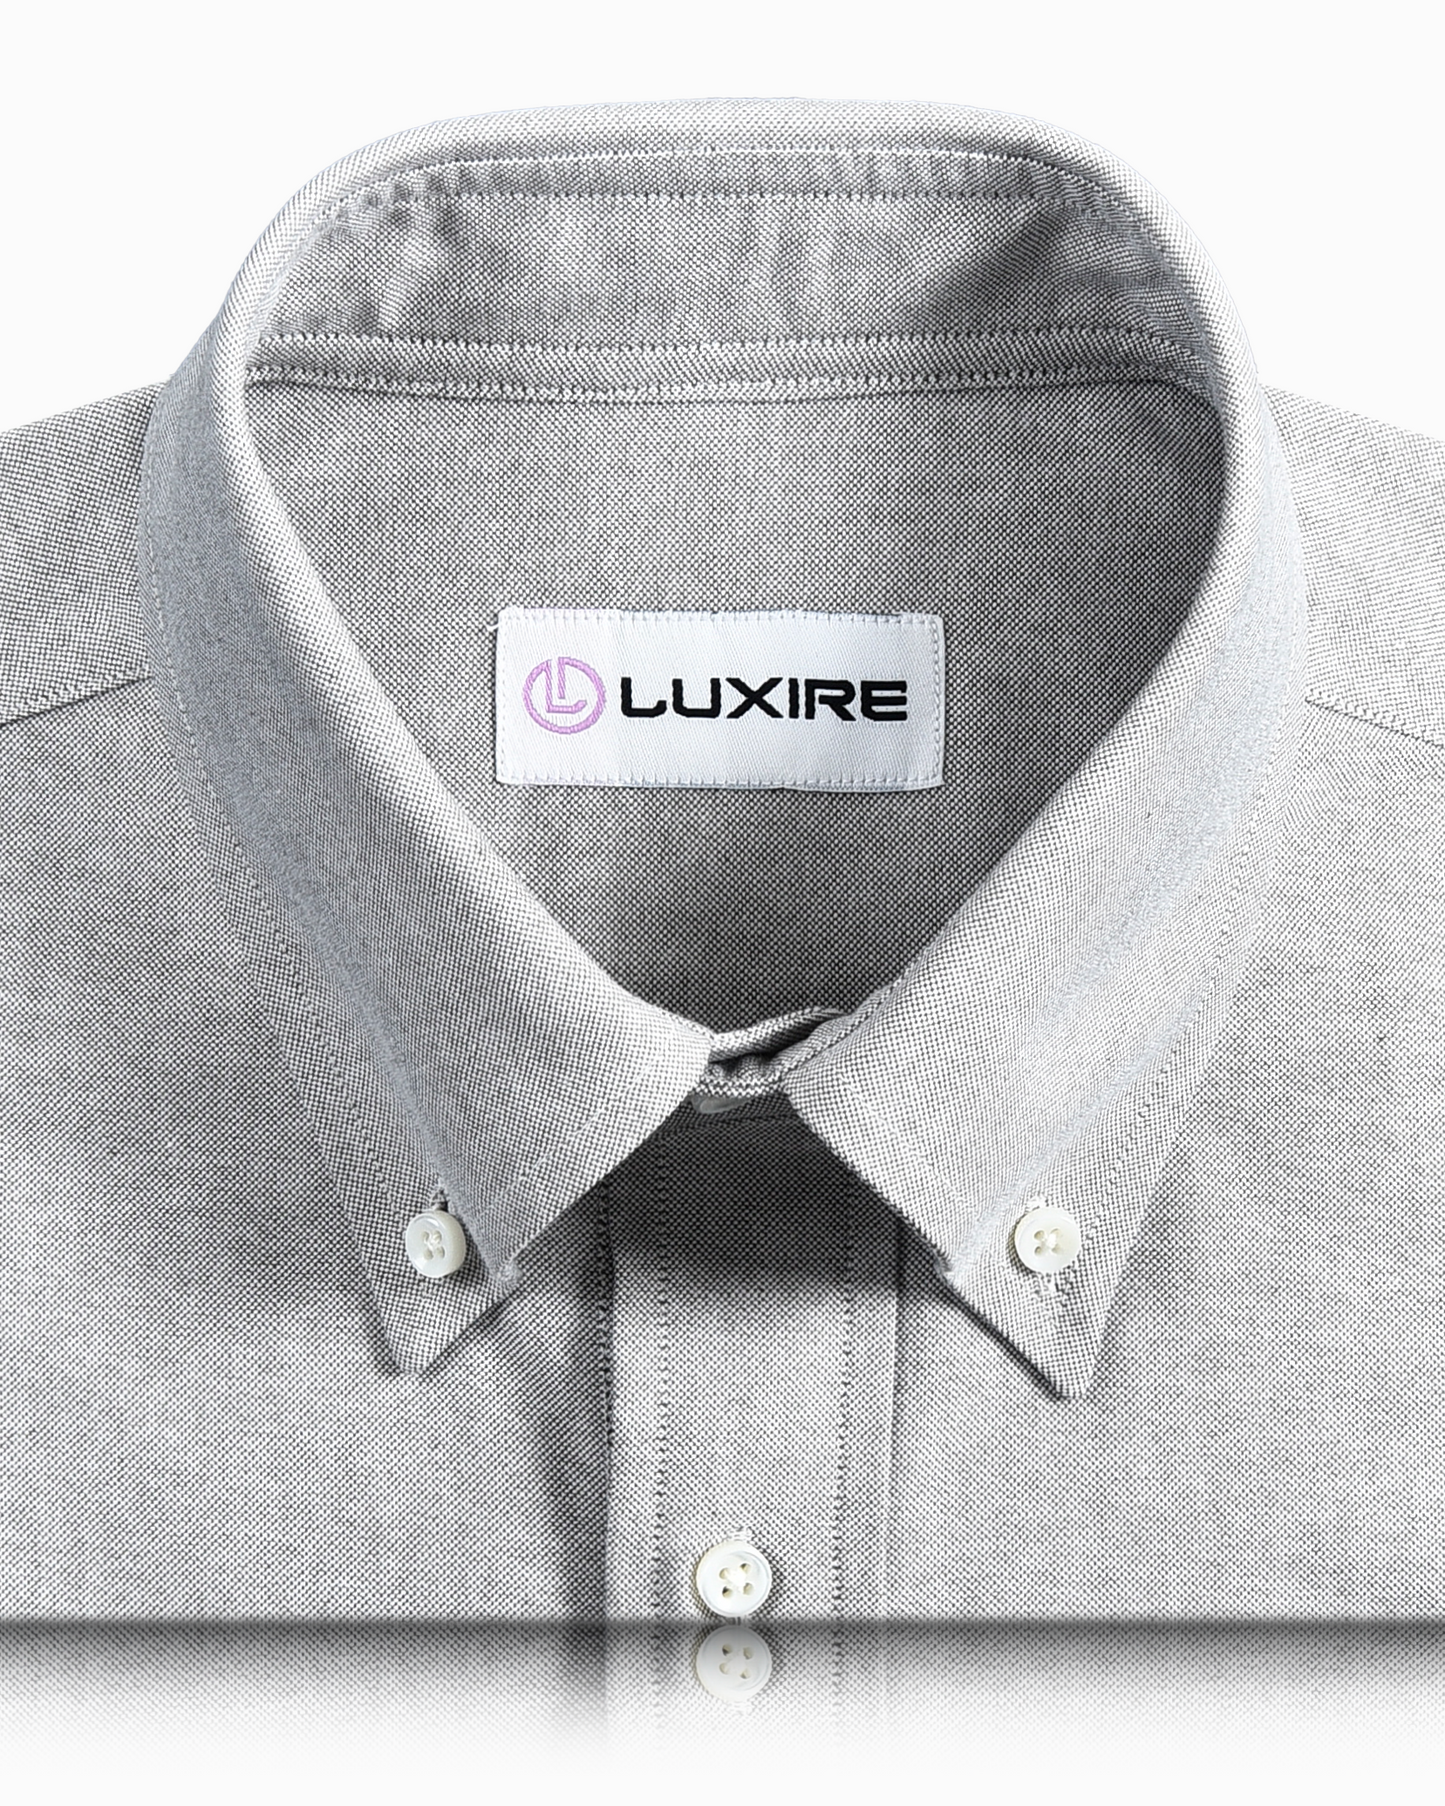 Collar of the custom oxford shirt for men by Luxire in pebble grey